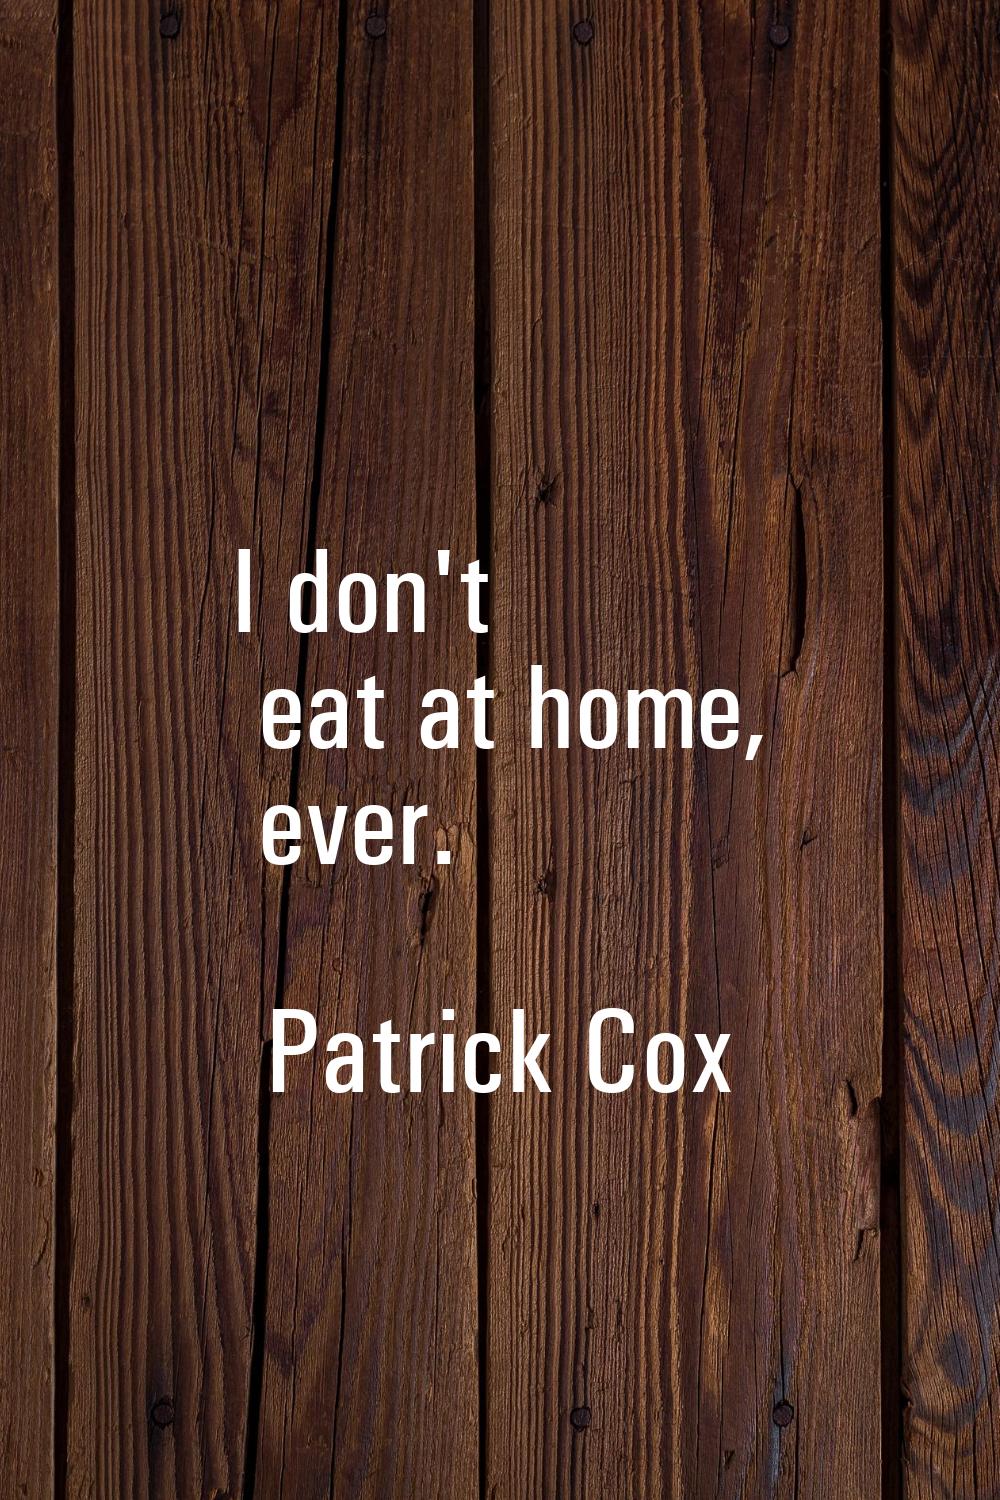 I don't eat at home, ever.